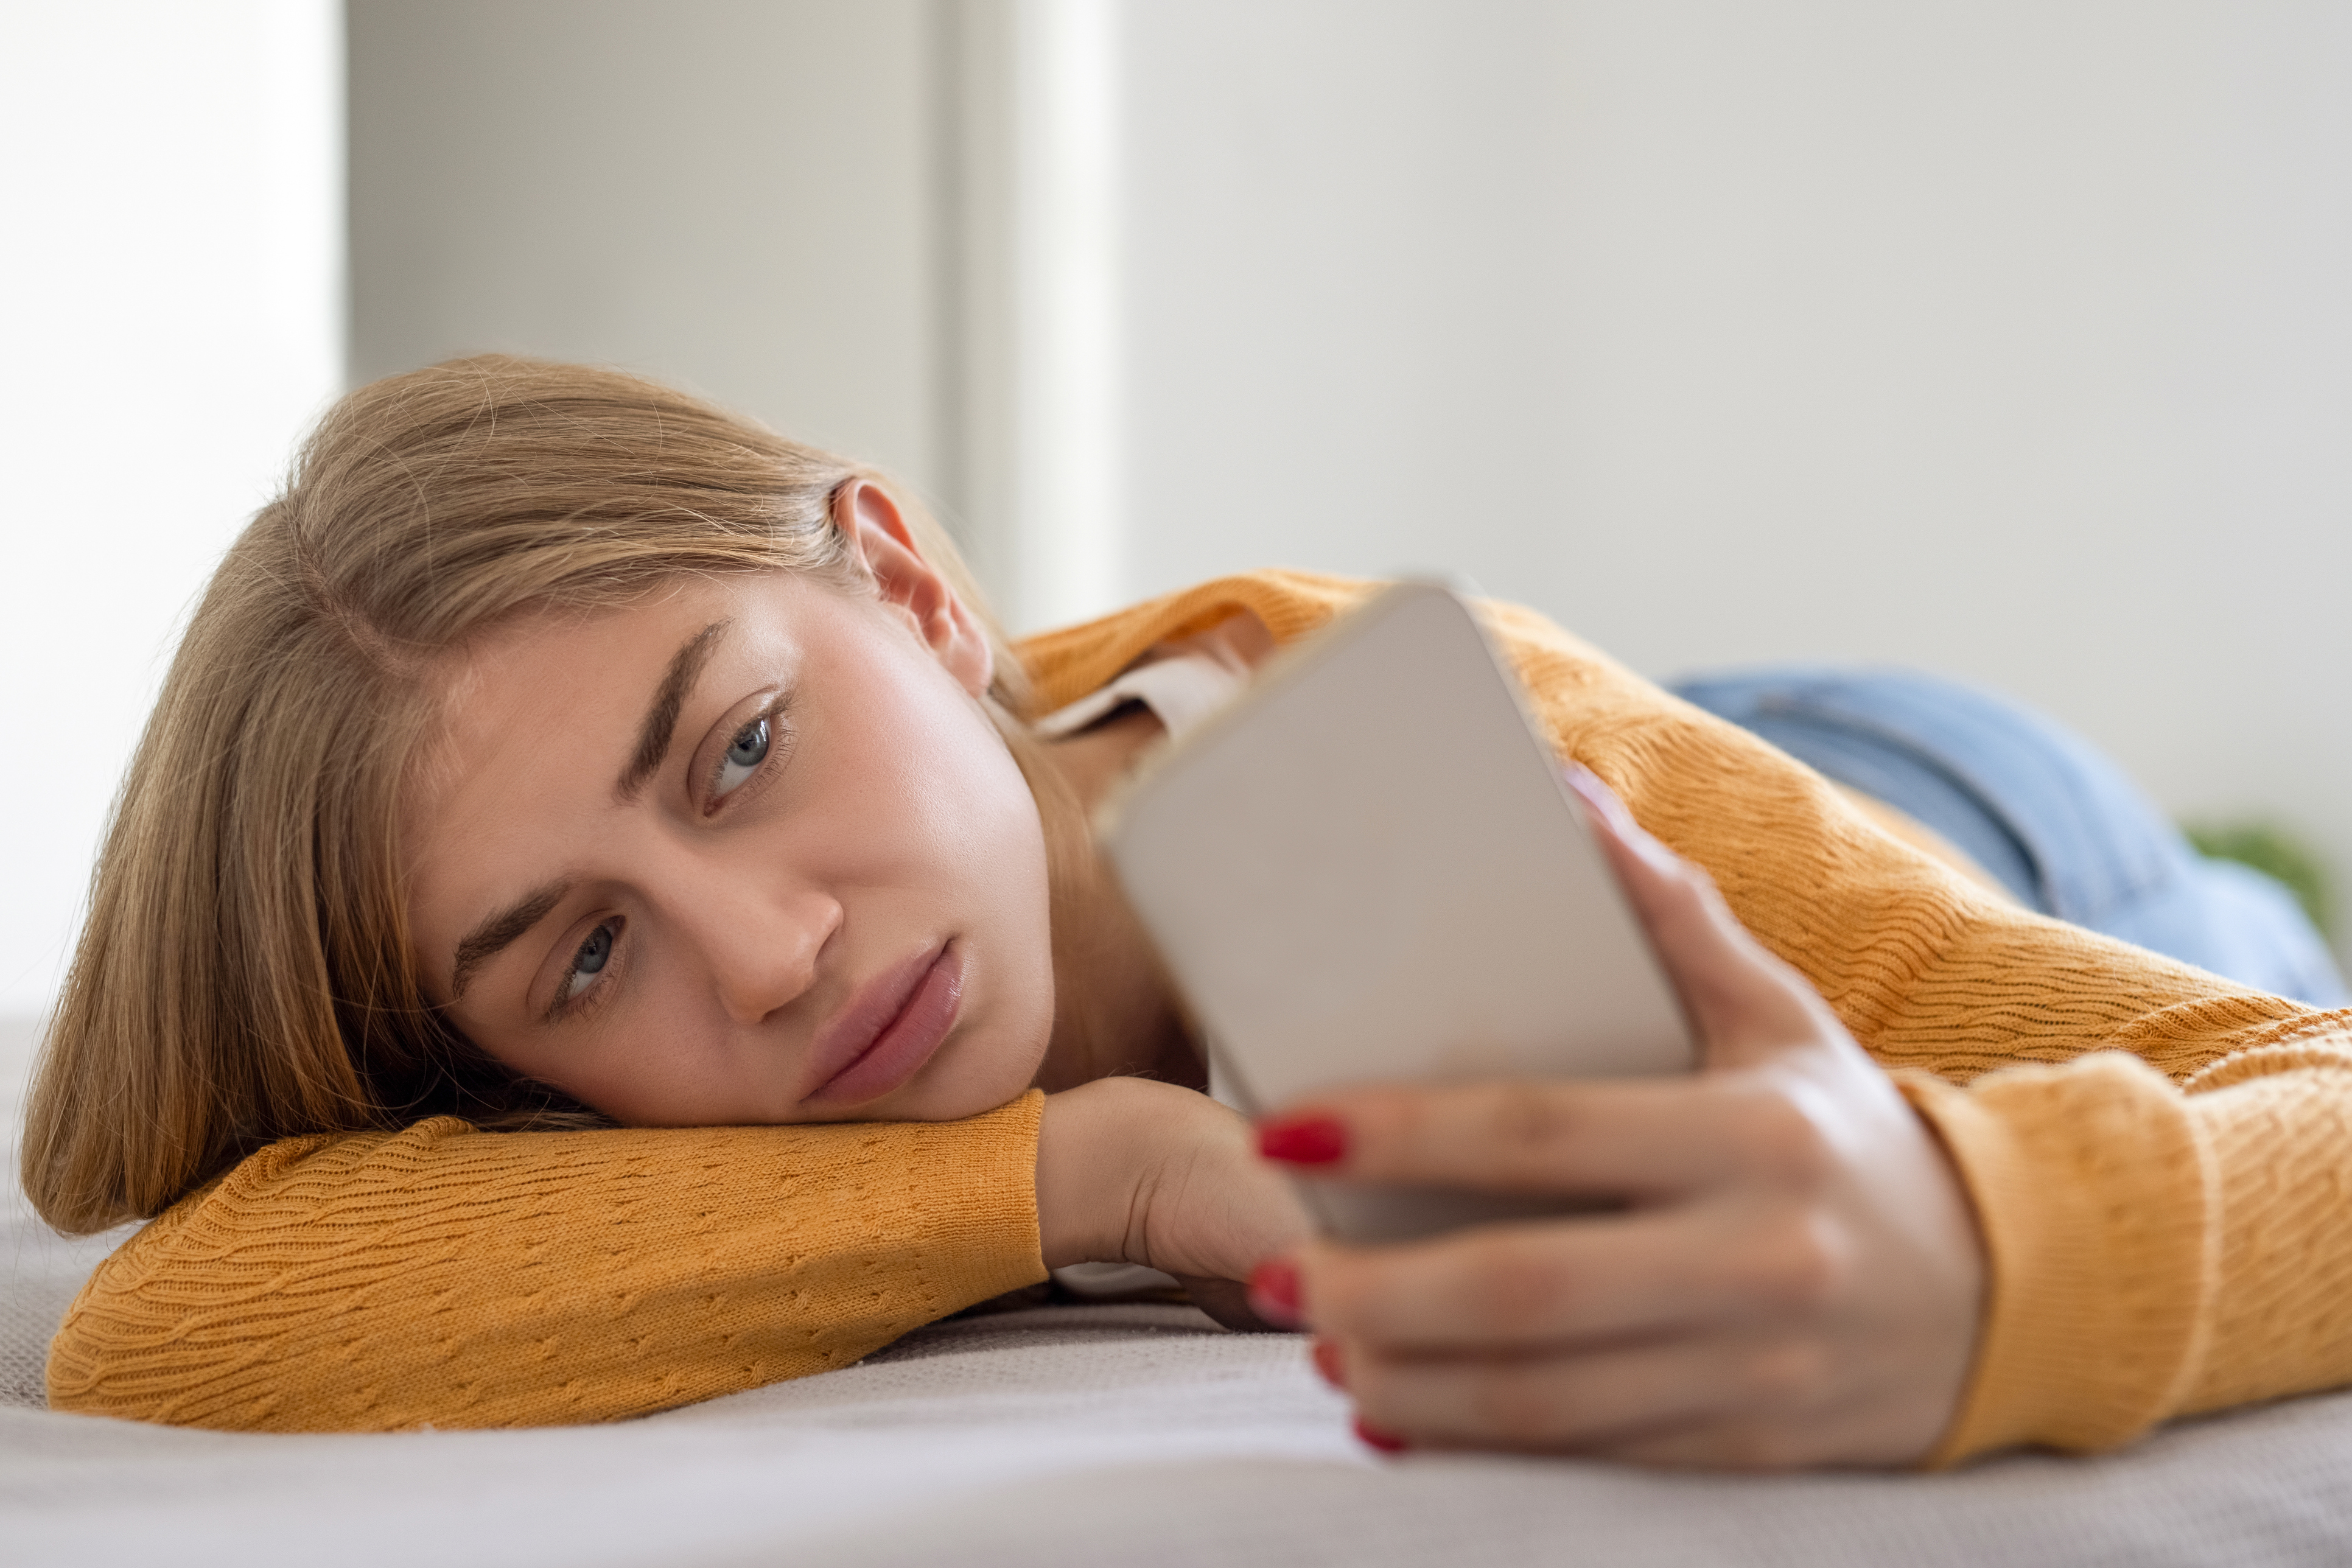 How Long Should I Wait For A Guy To Call Or Text After Sex?